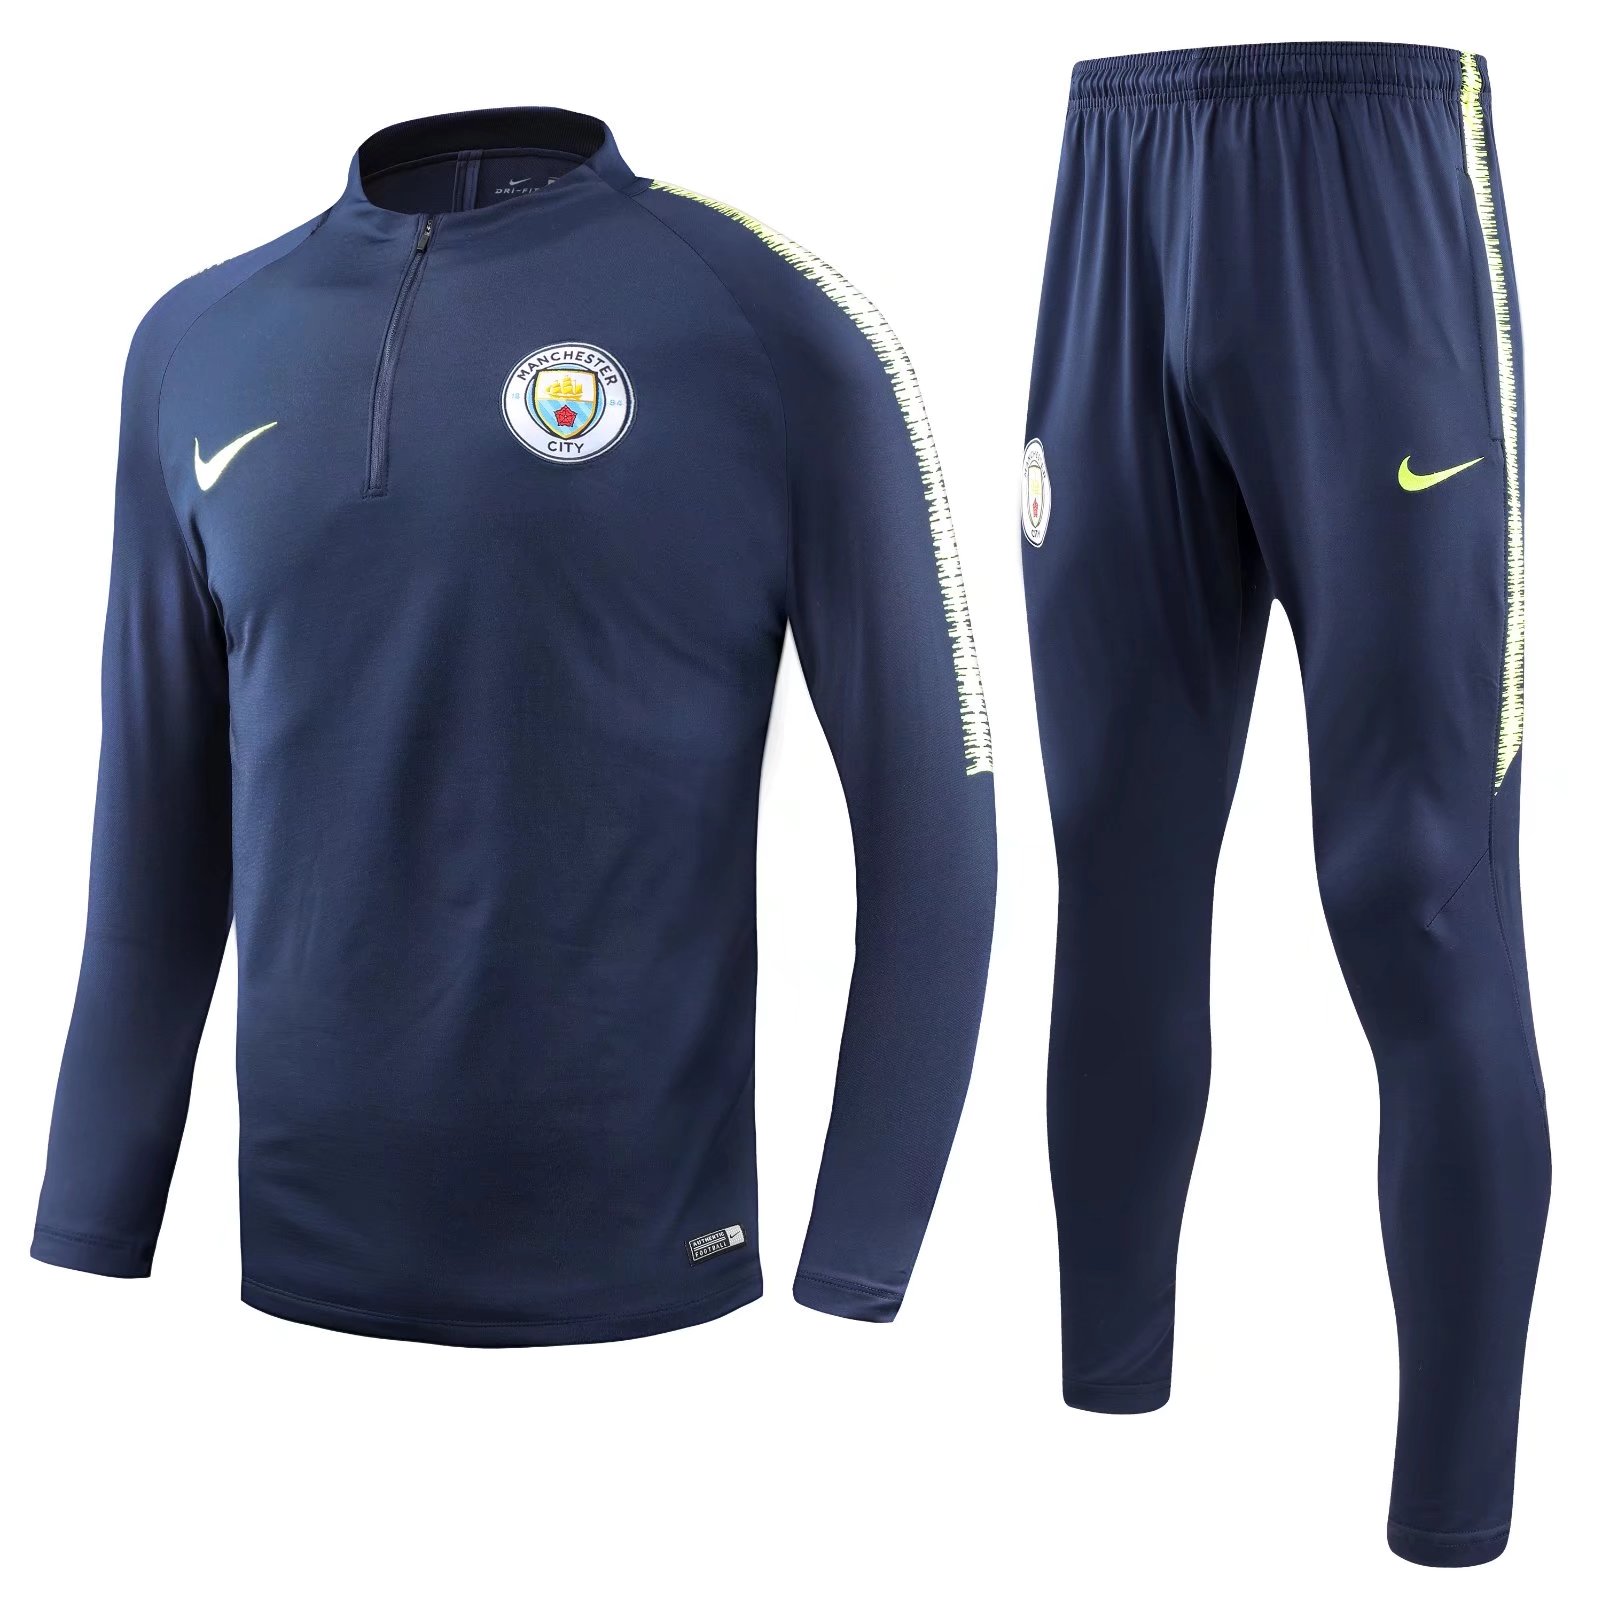 dynamisch Monument Direct Manchester City Sport Gear,Manchester City Soccer Uniforms,Manchester City  Soccer Jerseys,Manchester City Football Shirts | Jersey247.org Sport Kits  Shop